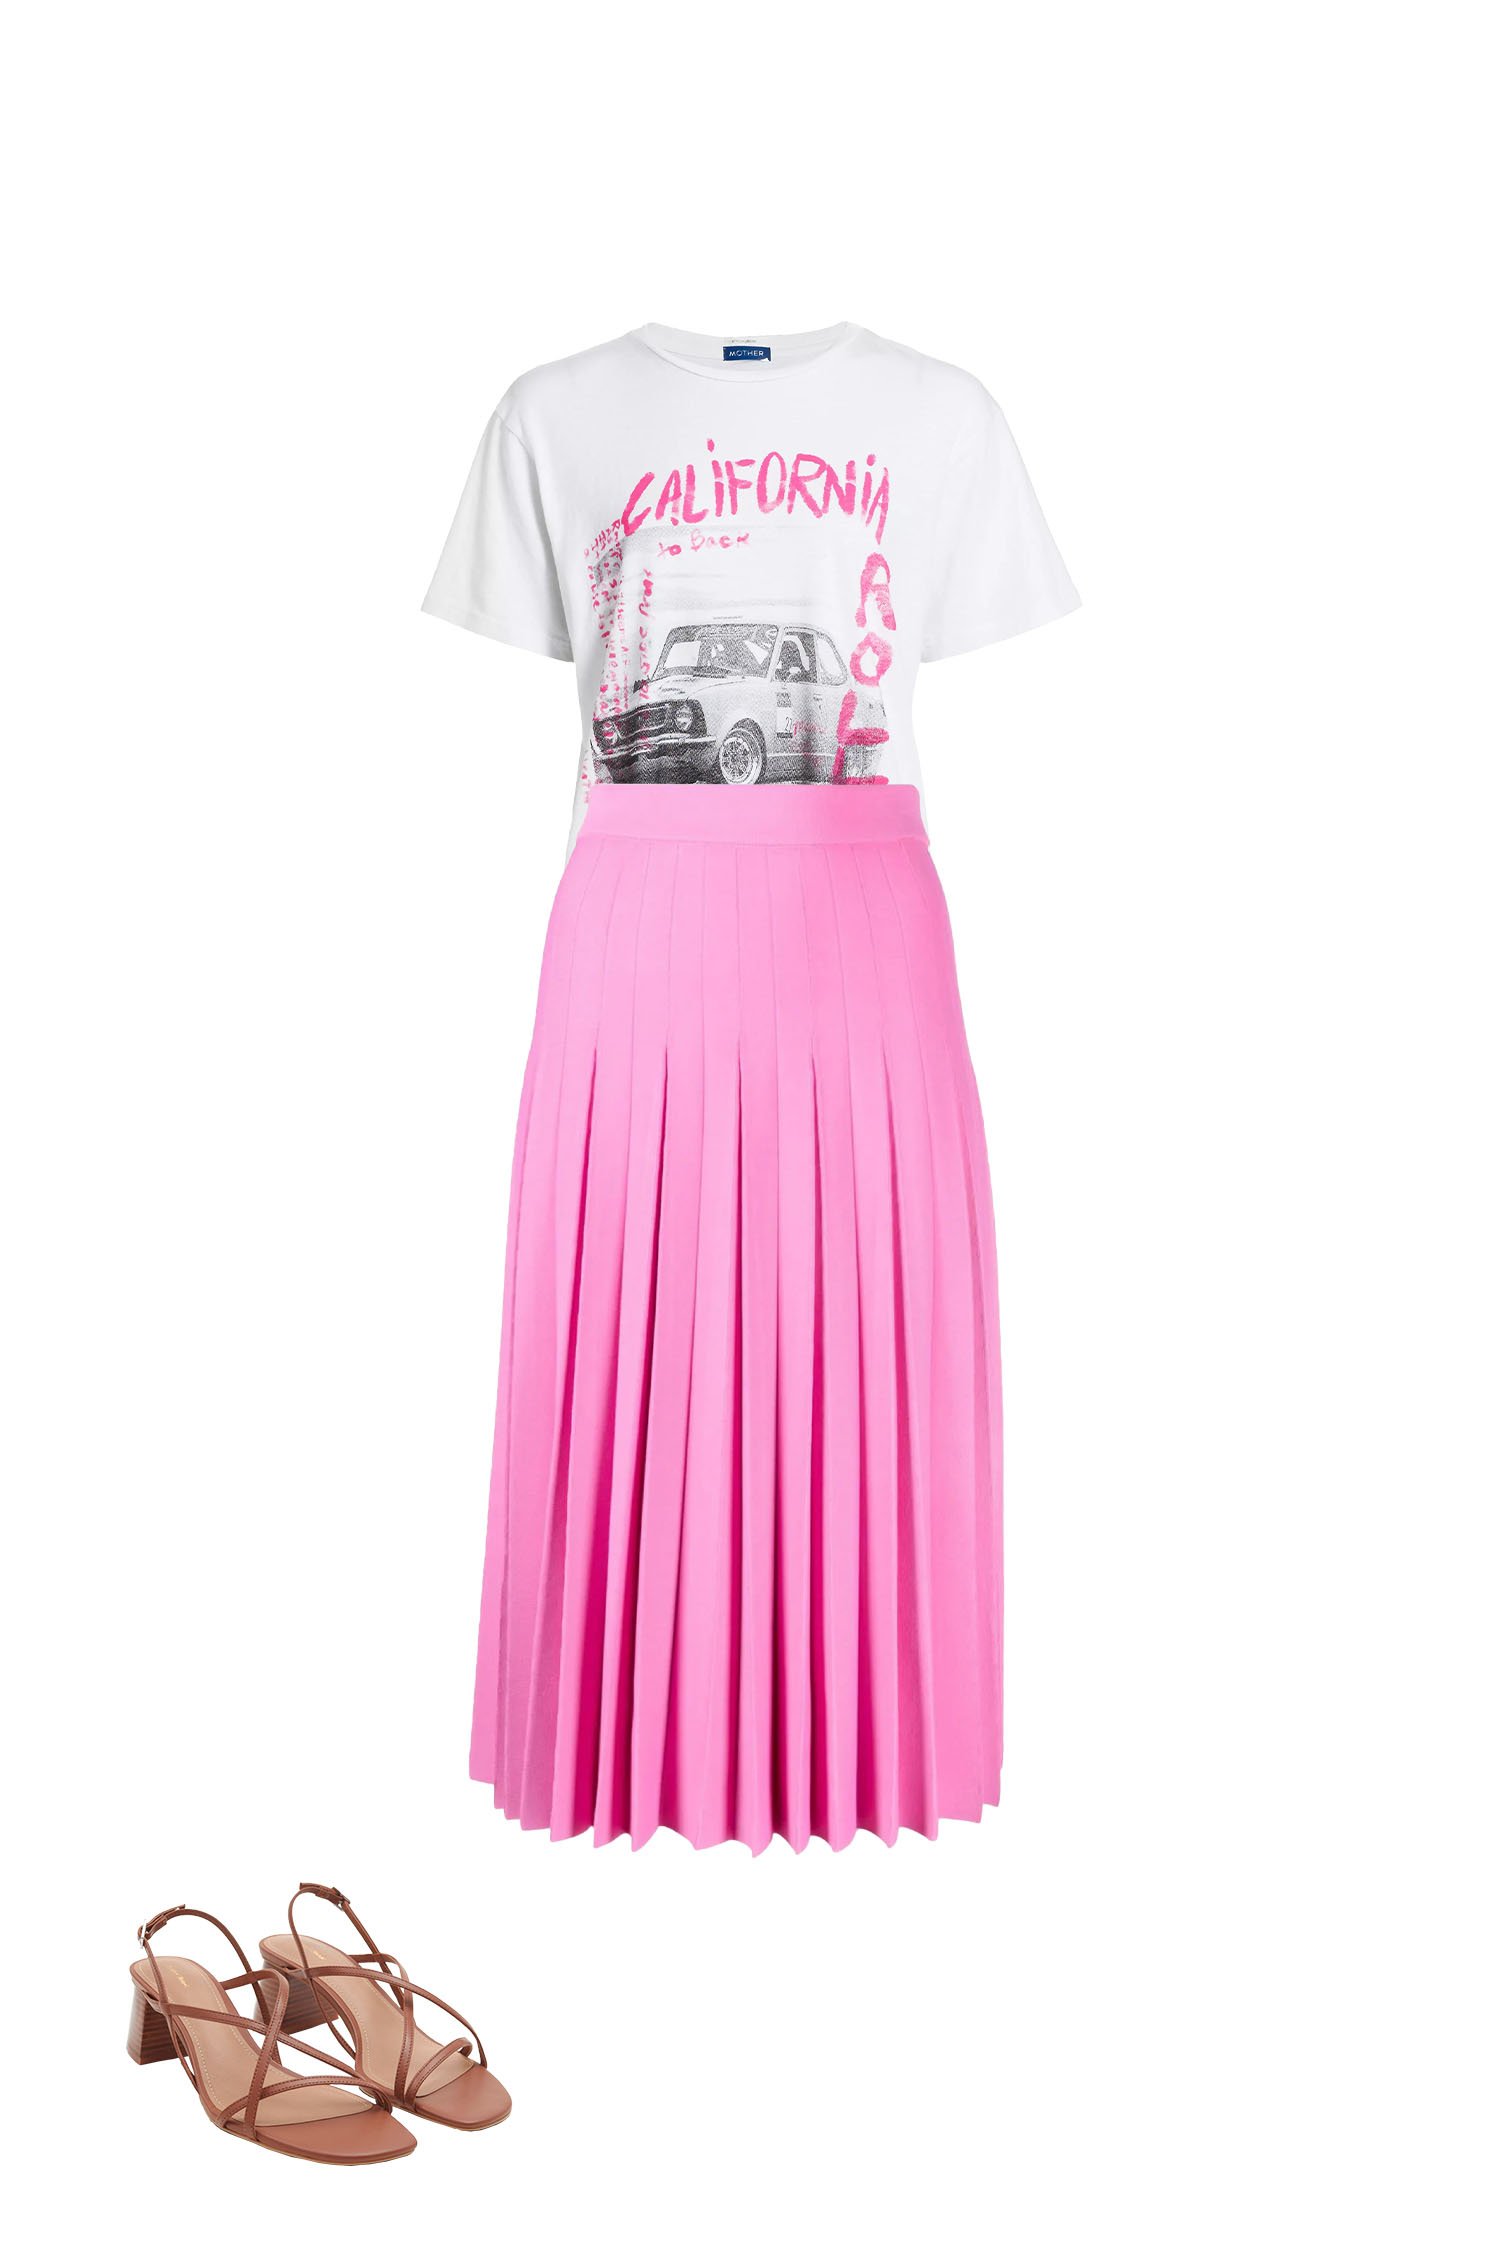 Bubblegum Pink Pleated Skirt with Graphic Print T-shirt and Brown Strappy Sandals